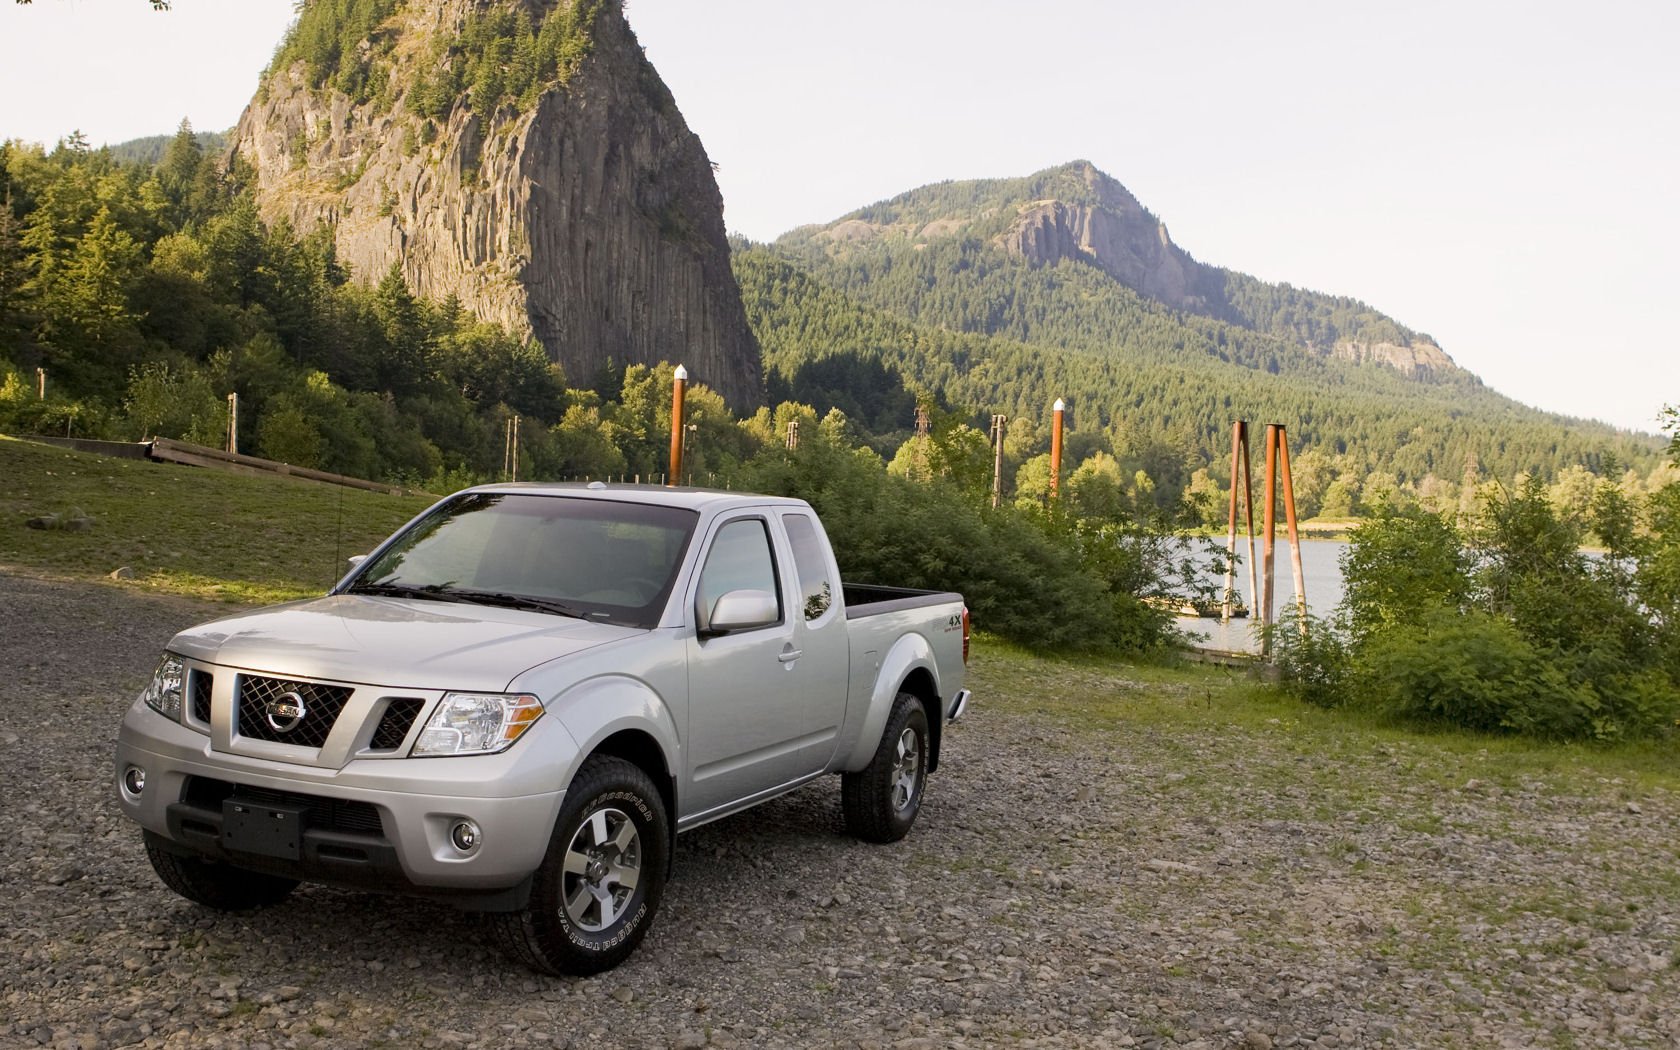 Nissan Frontier Picture Wallpaper 65928 1680x1050px